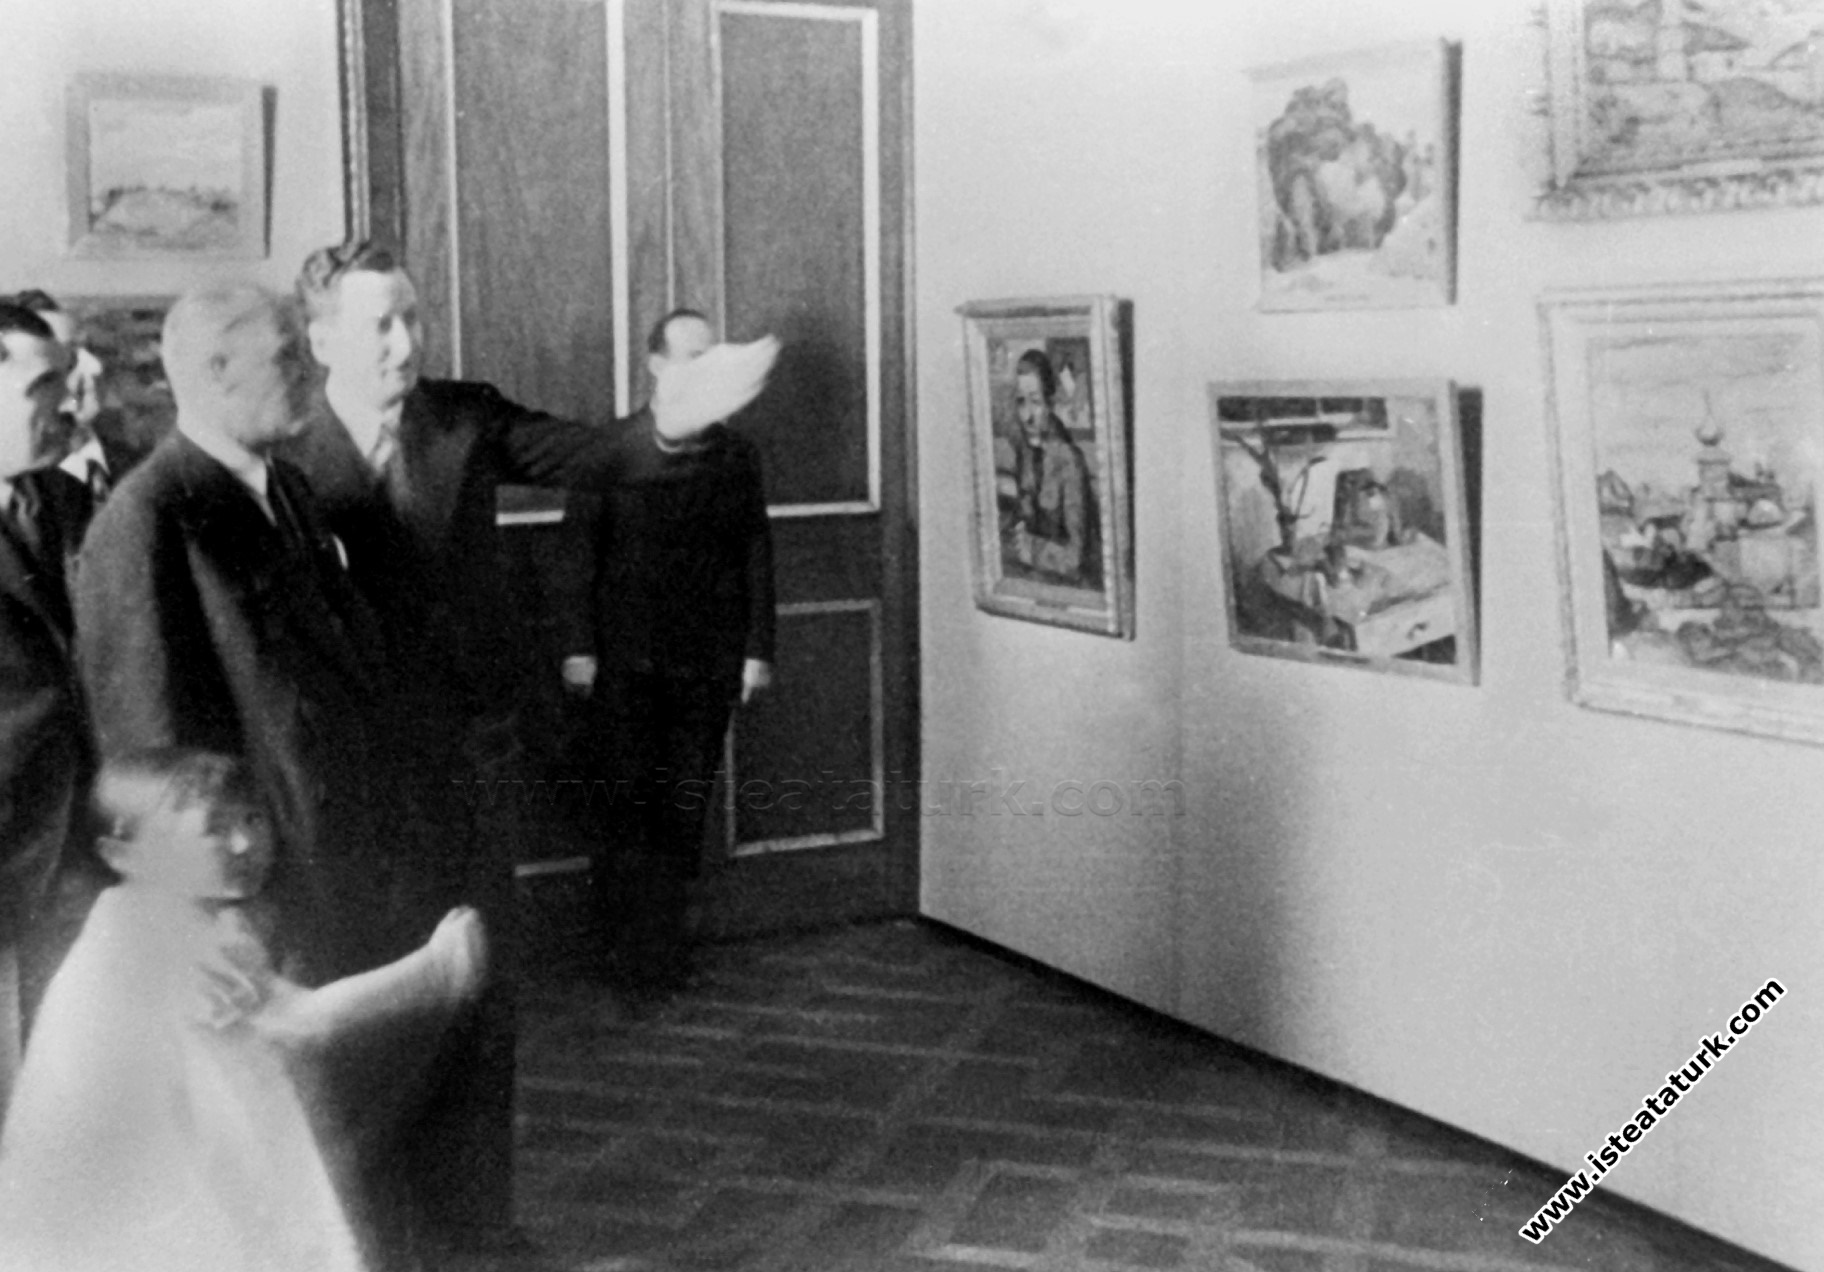 The Effects of Atatürk's Artist Personality on Art and Artist